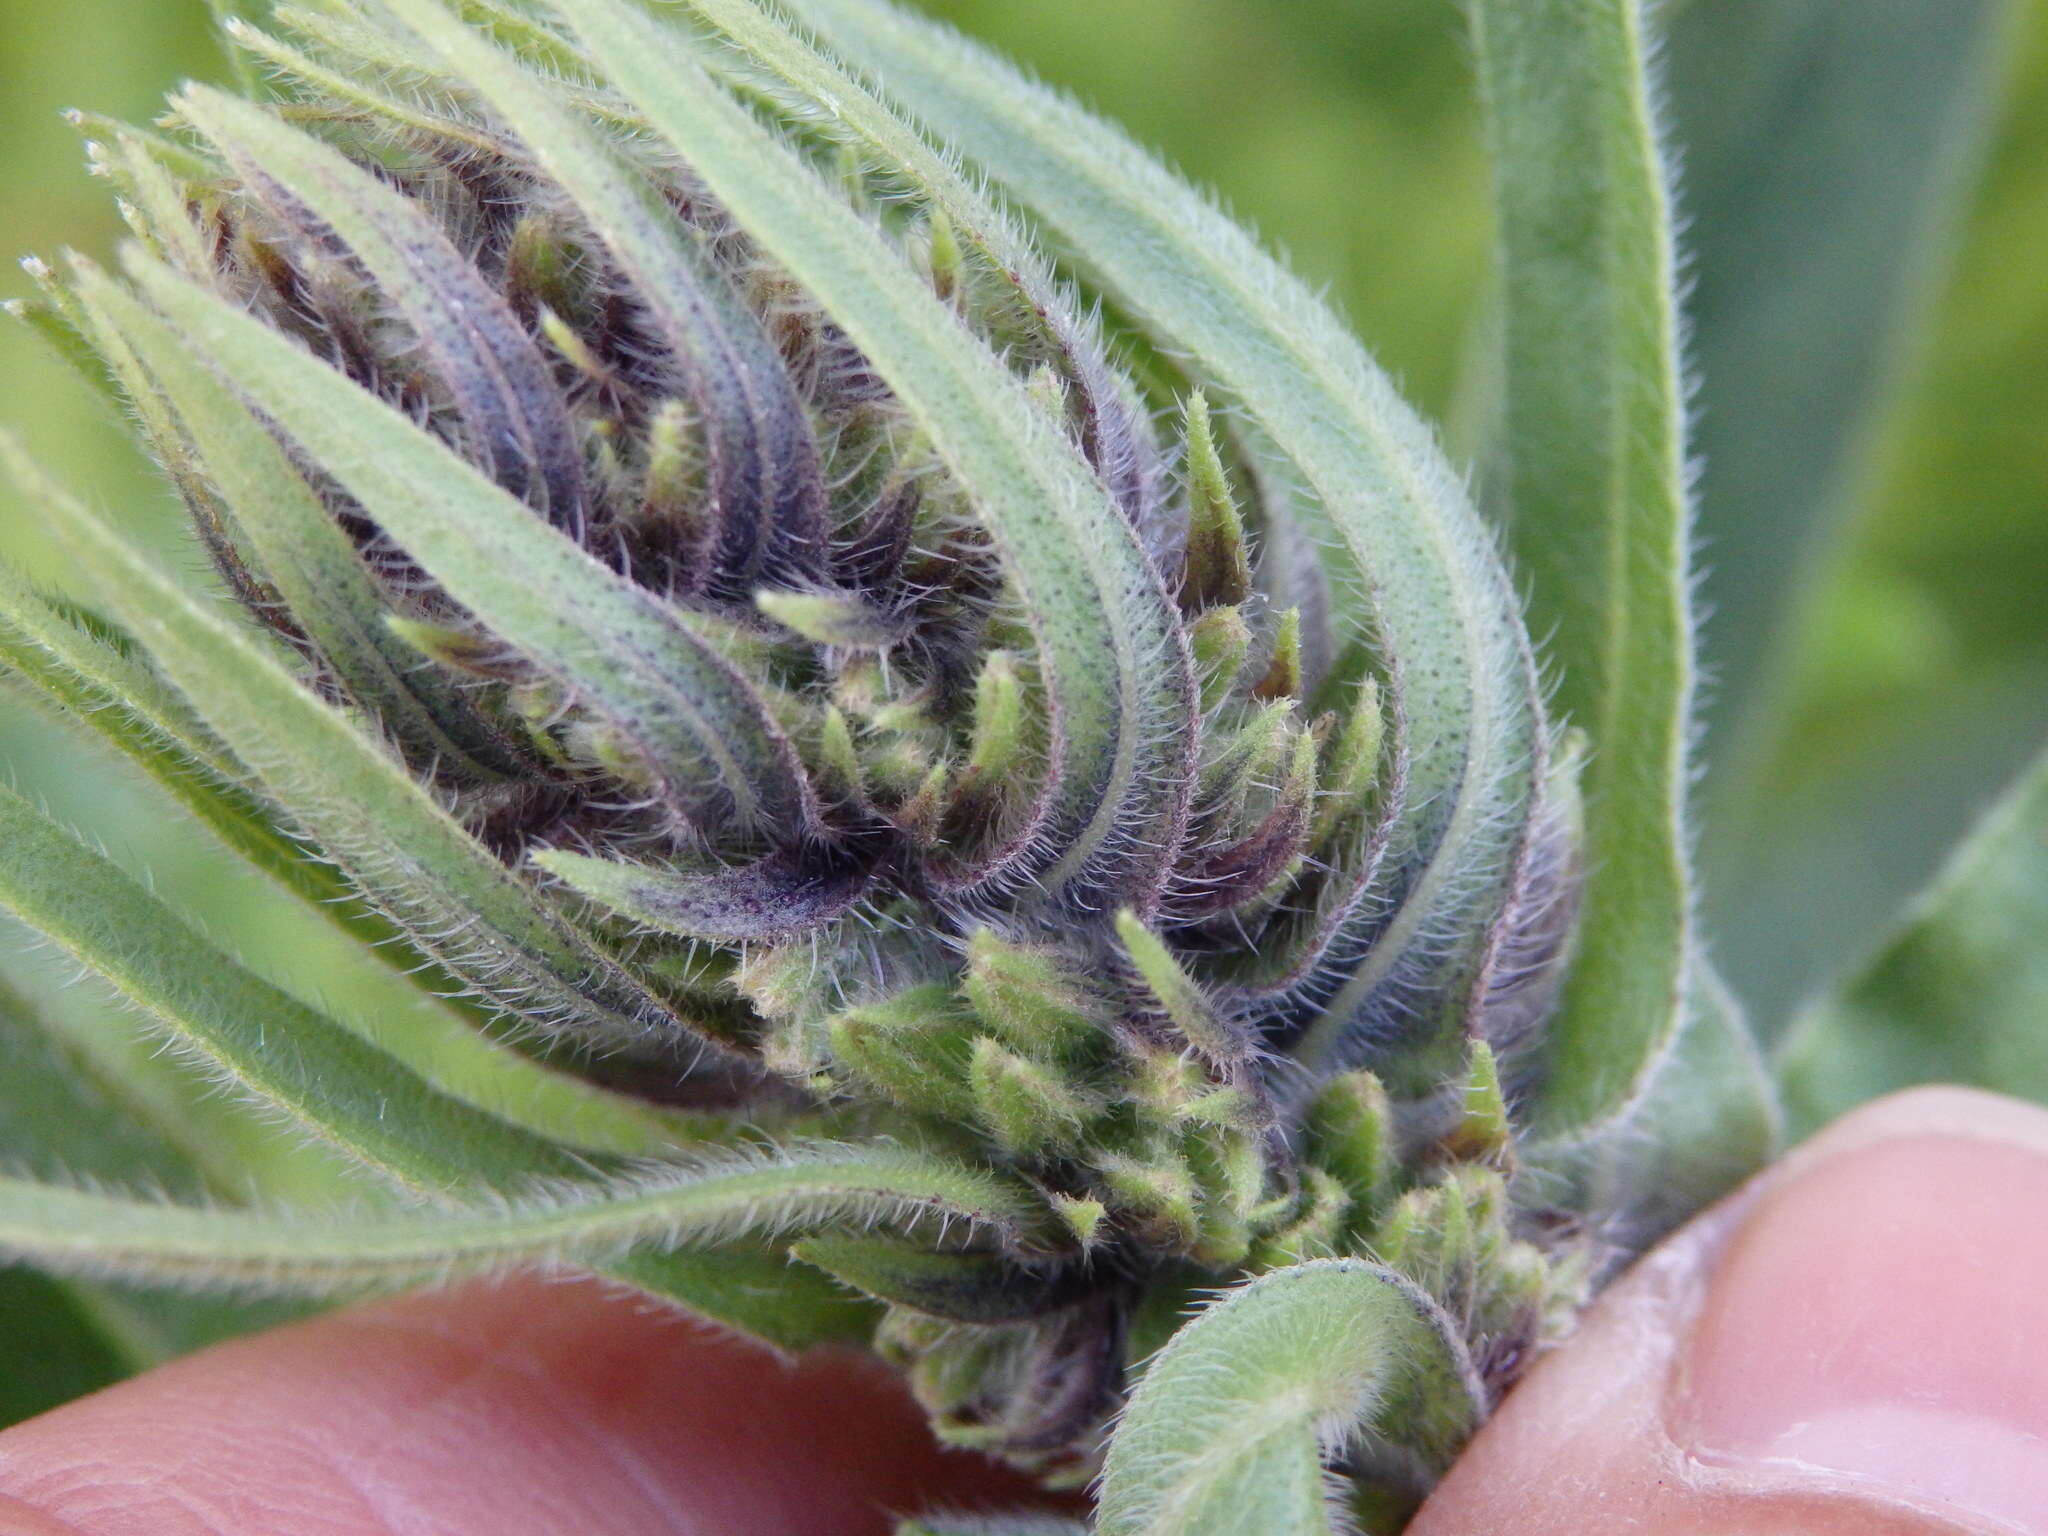 Image of violet-vein viper's bugloss